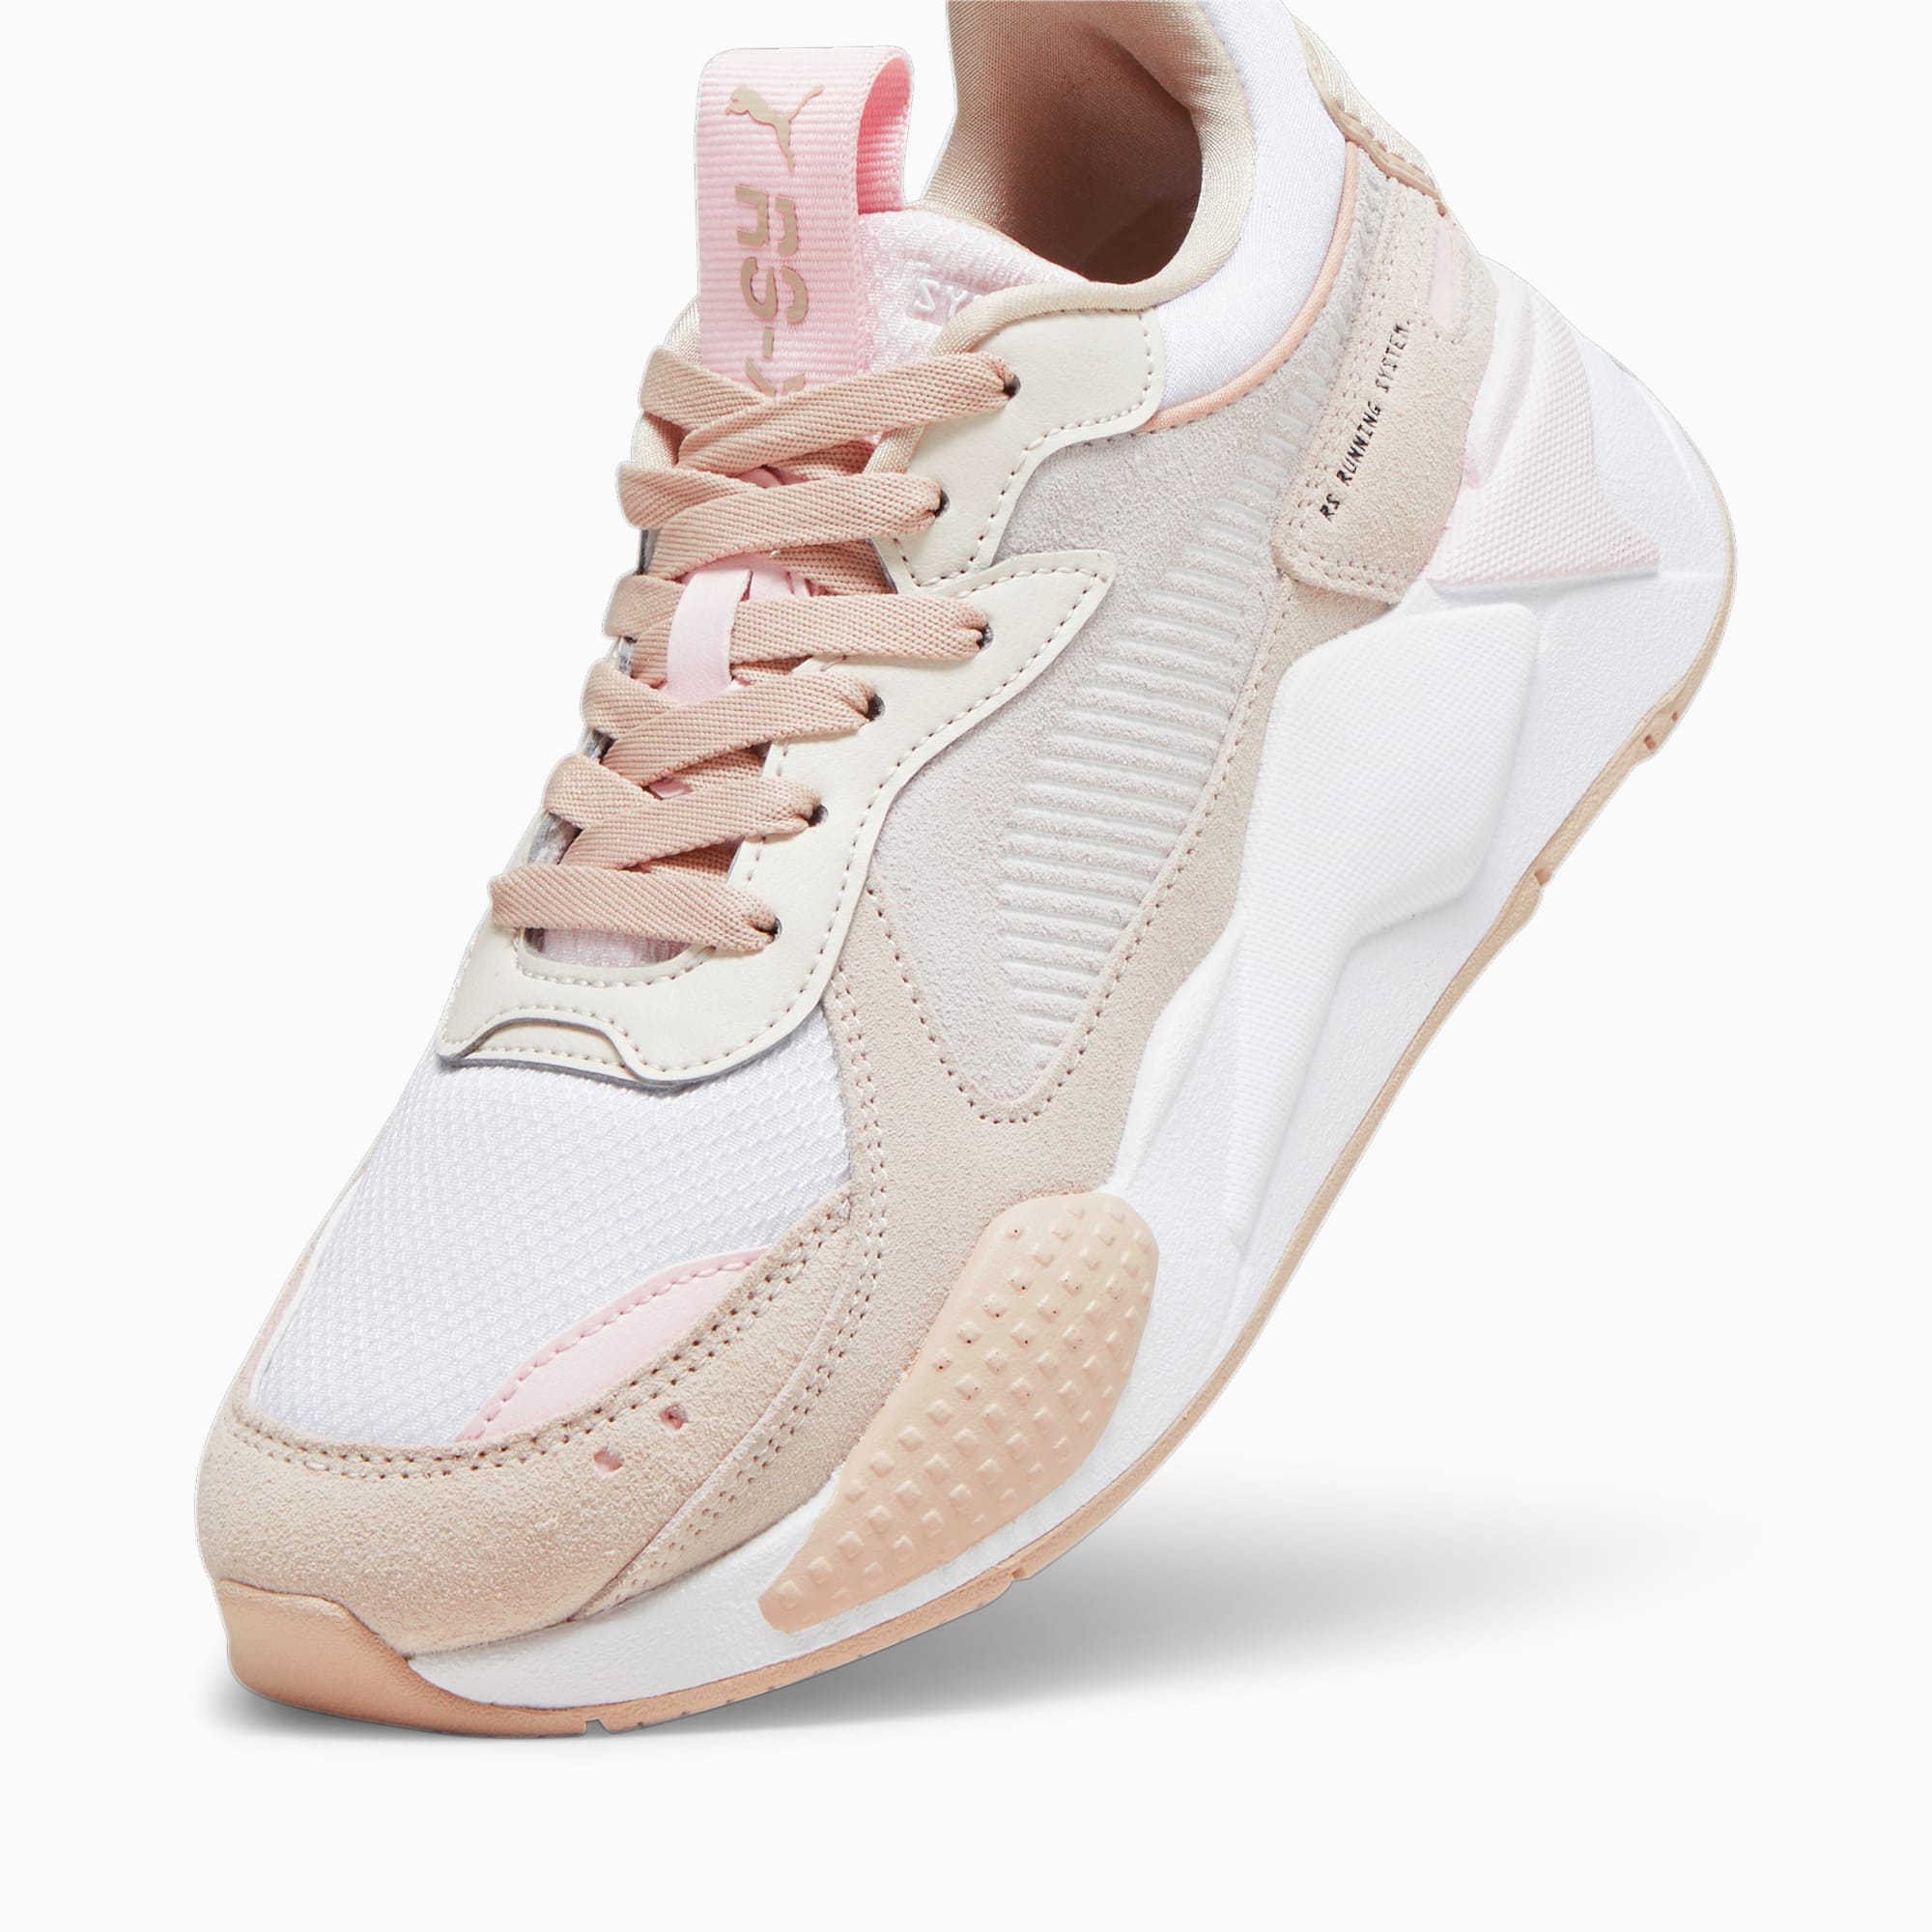 RS-X Reinvent Women's Sneakers | PUMA